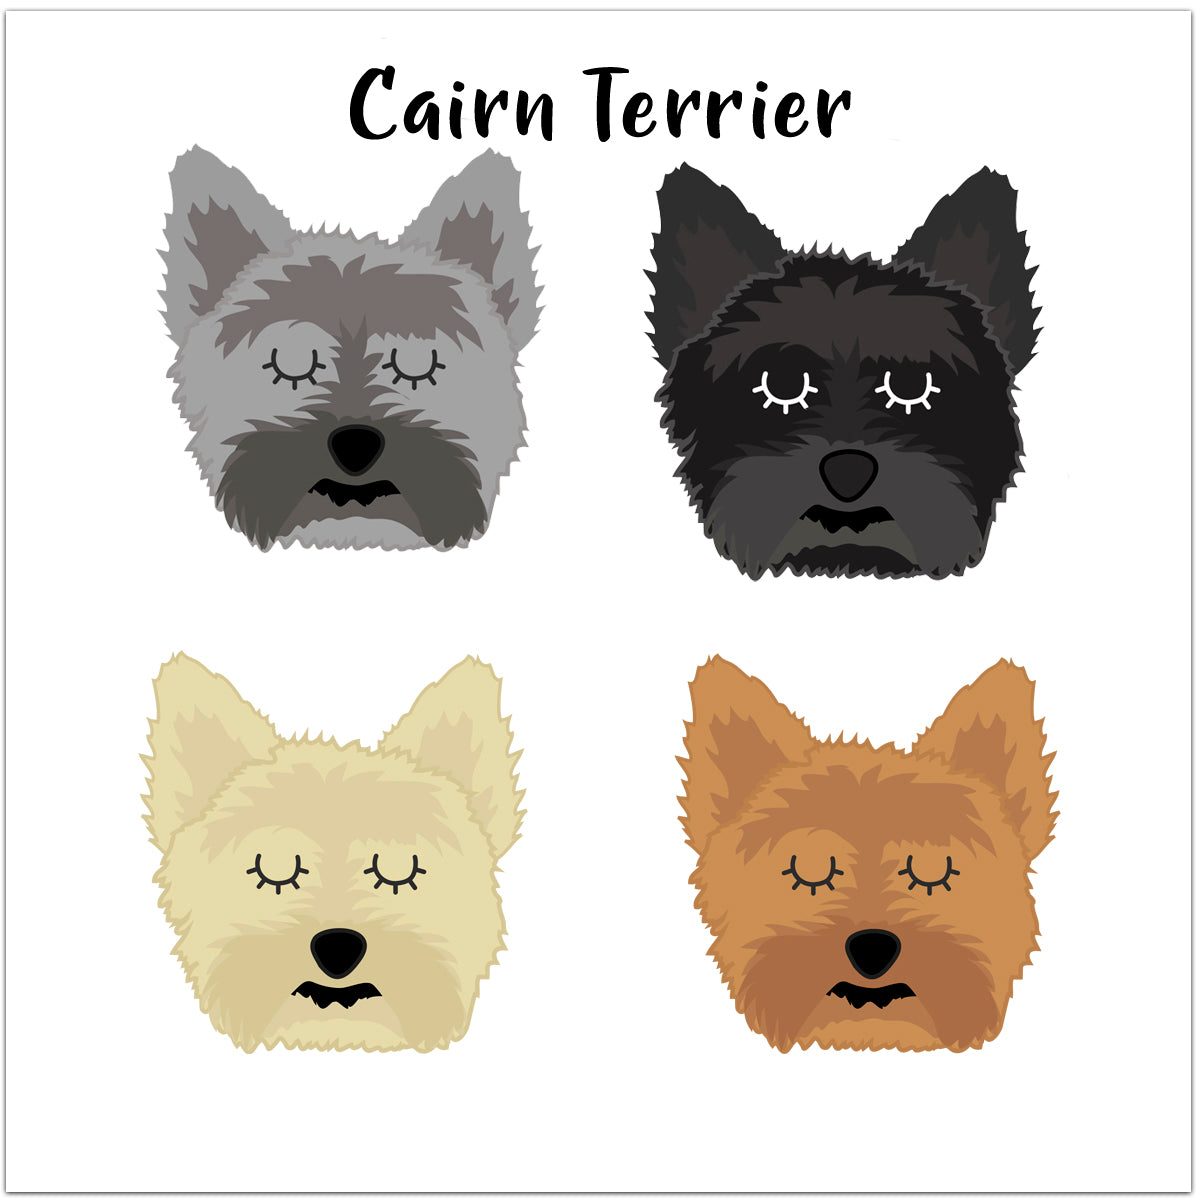 Cairn Terrier Personalised Christmas Present Sack  - Hoobynoo - Personalised Pet Tags and Gifts